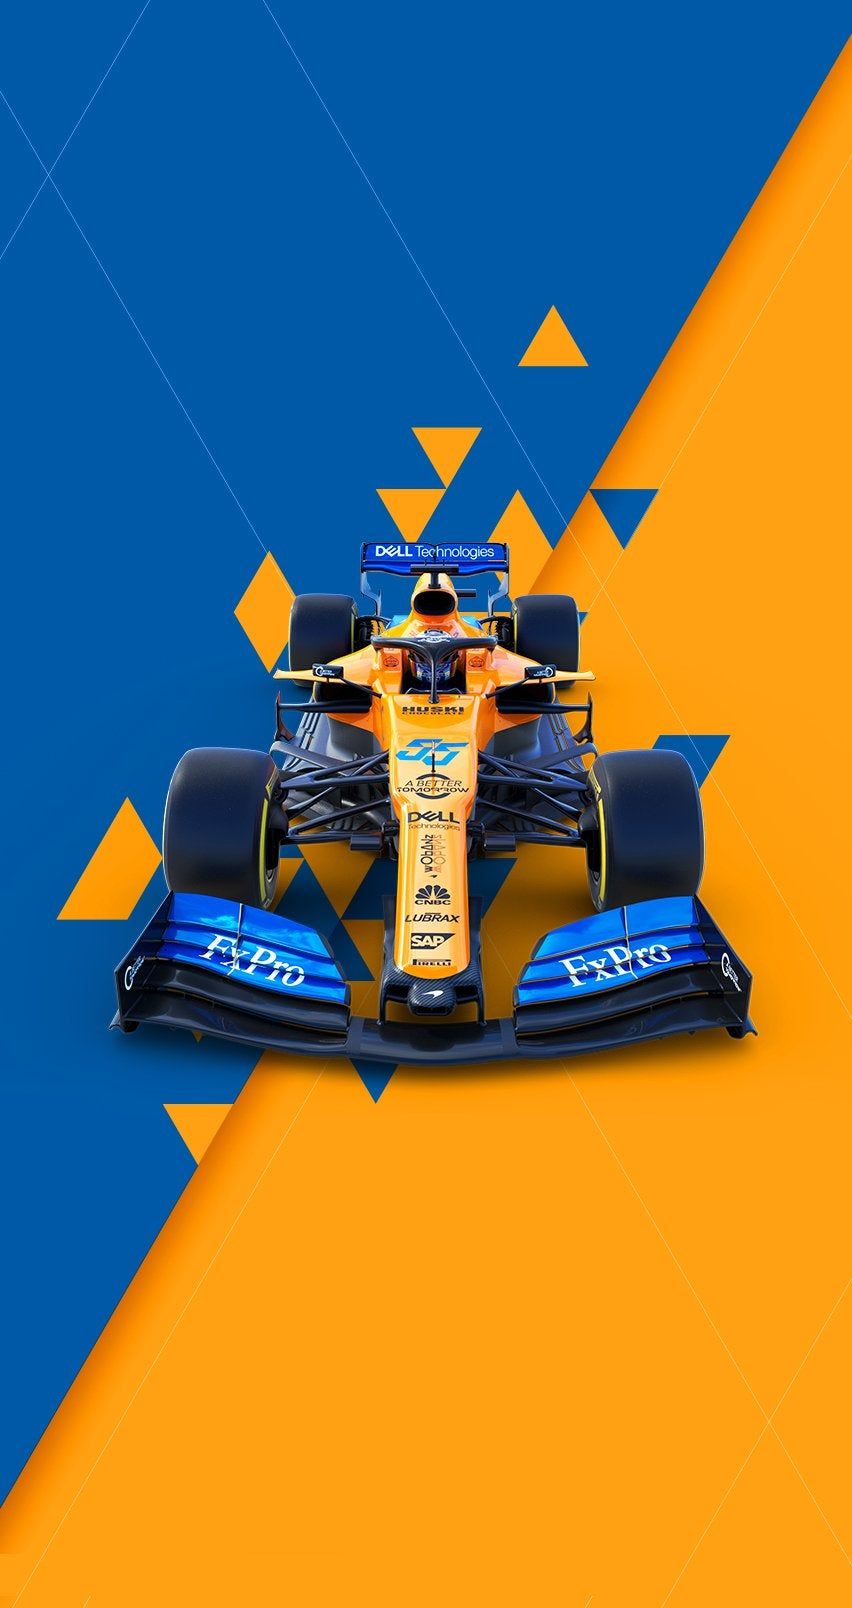 Looking for an updated McLaren wallpaper similar to this one from last year?